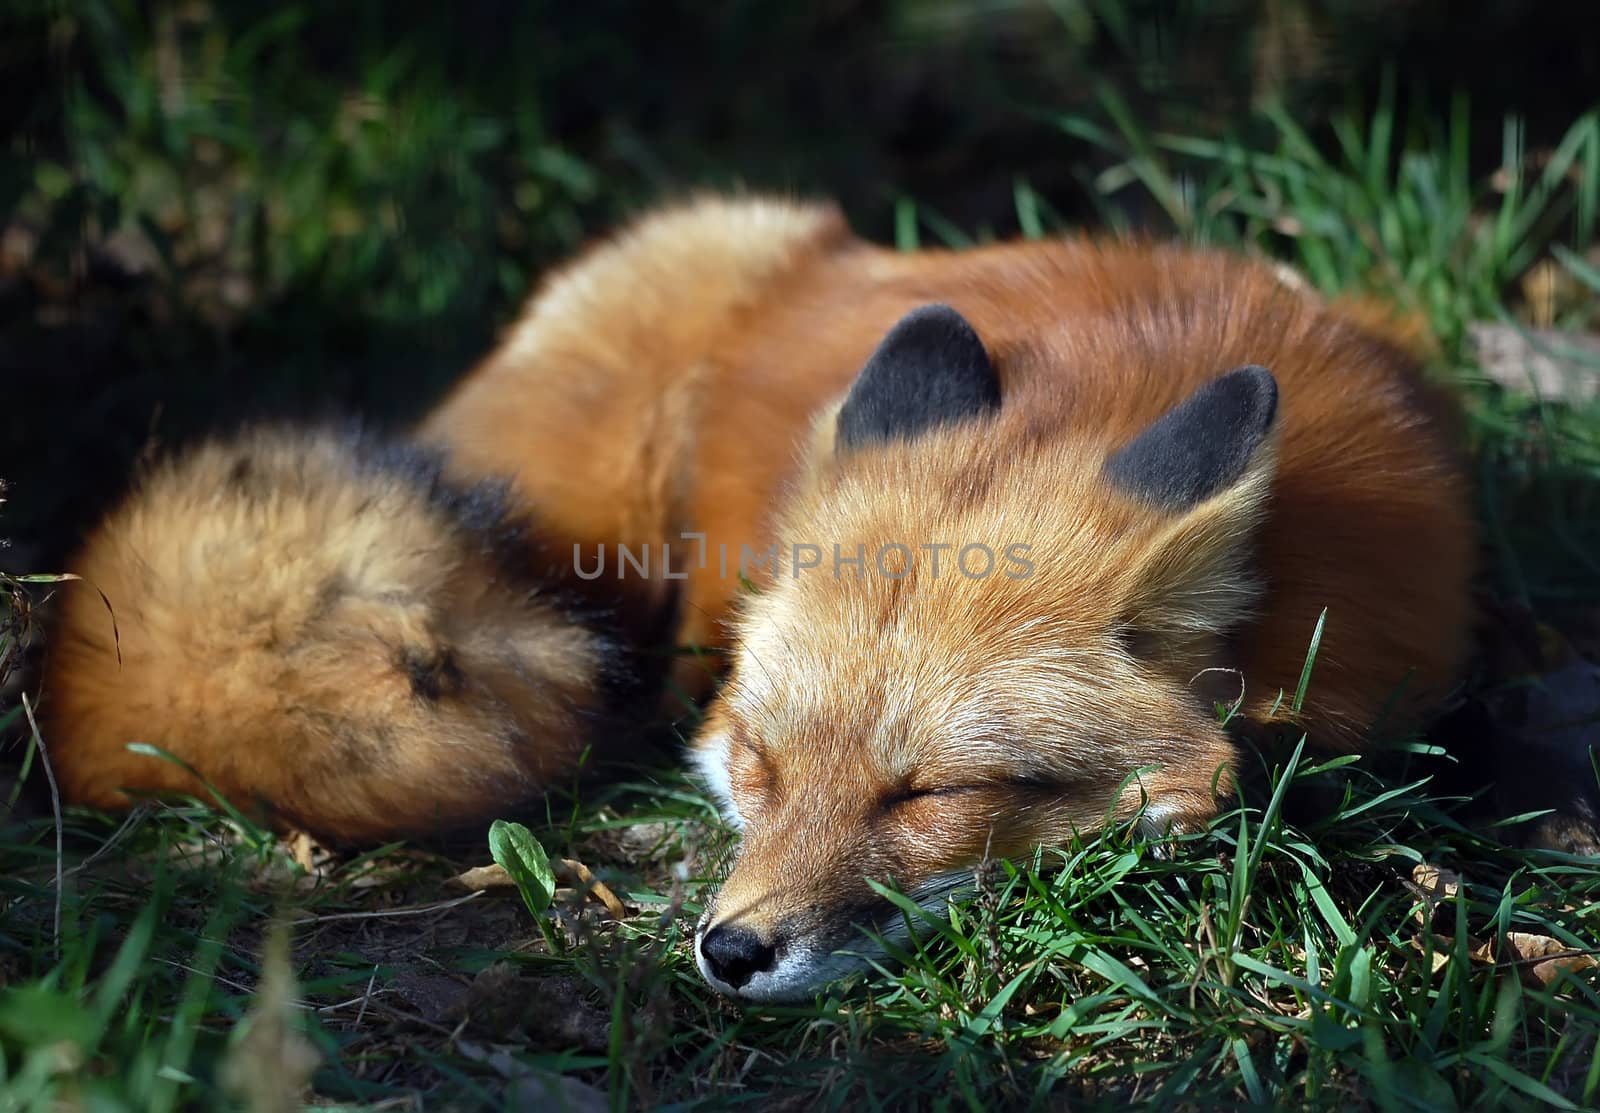 A close-up portrait of a Red Fox sleeping